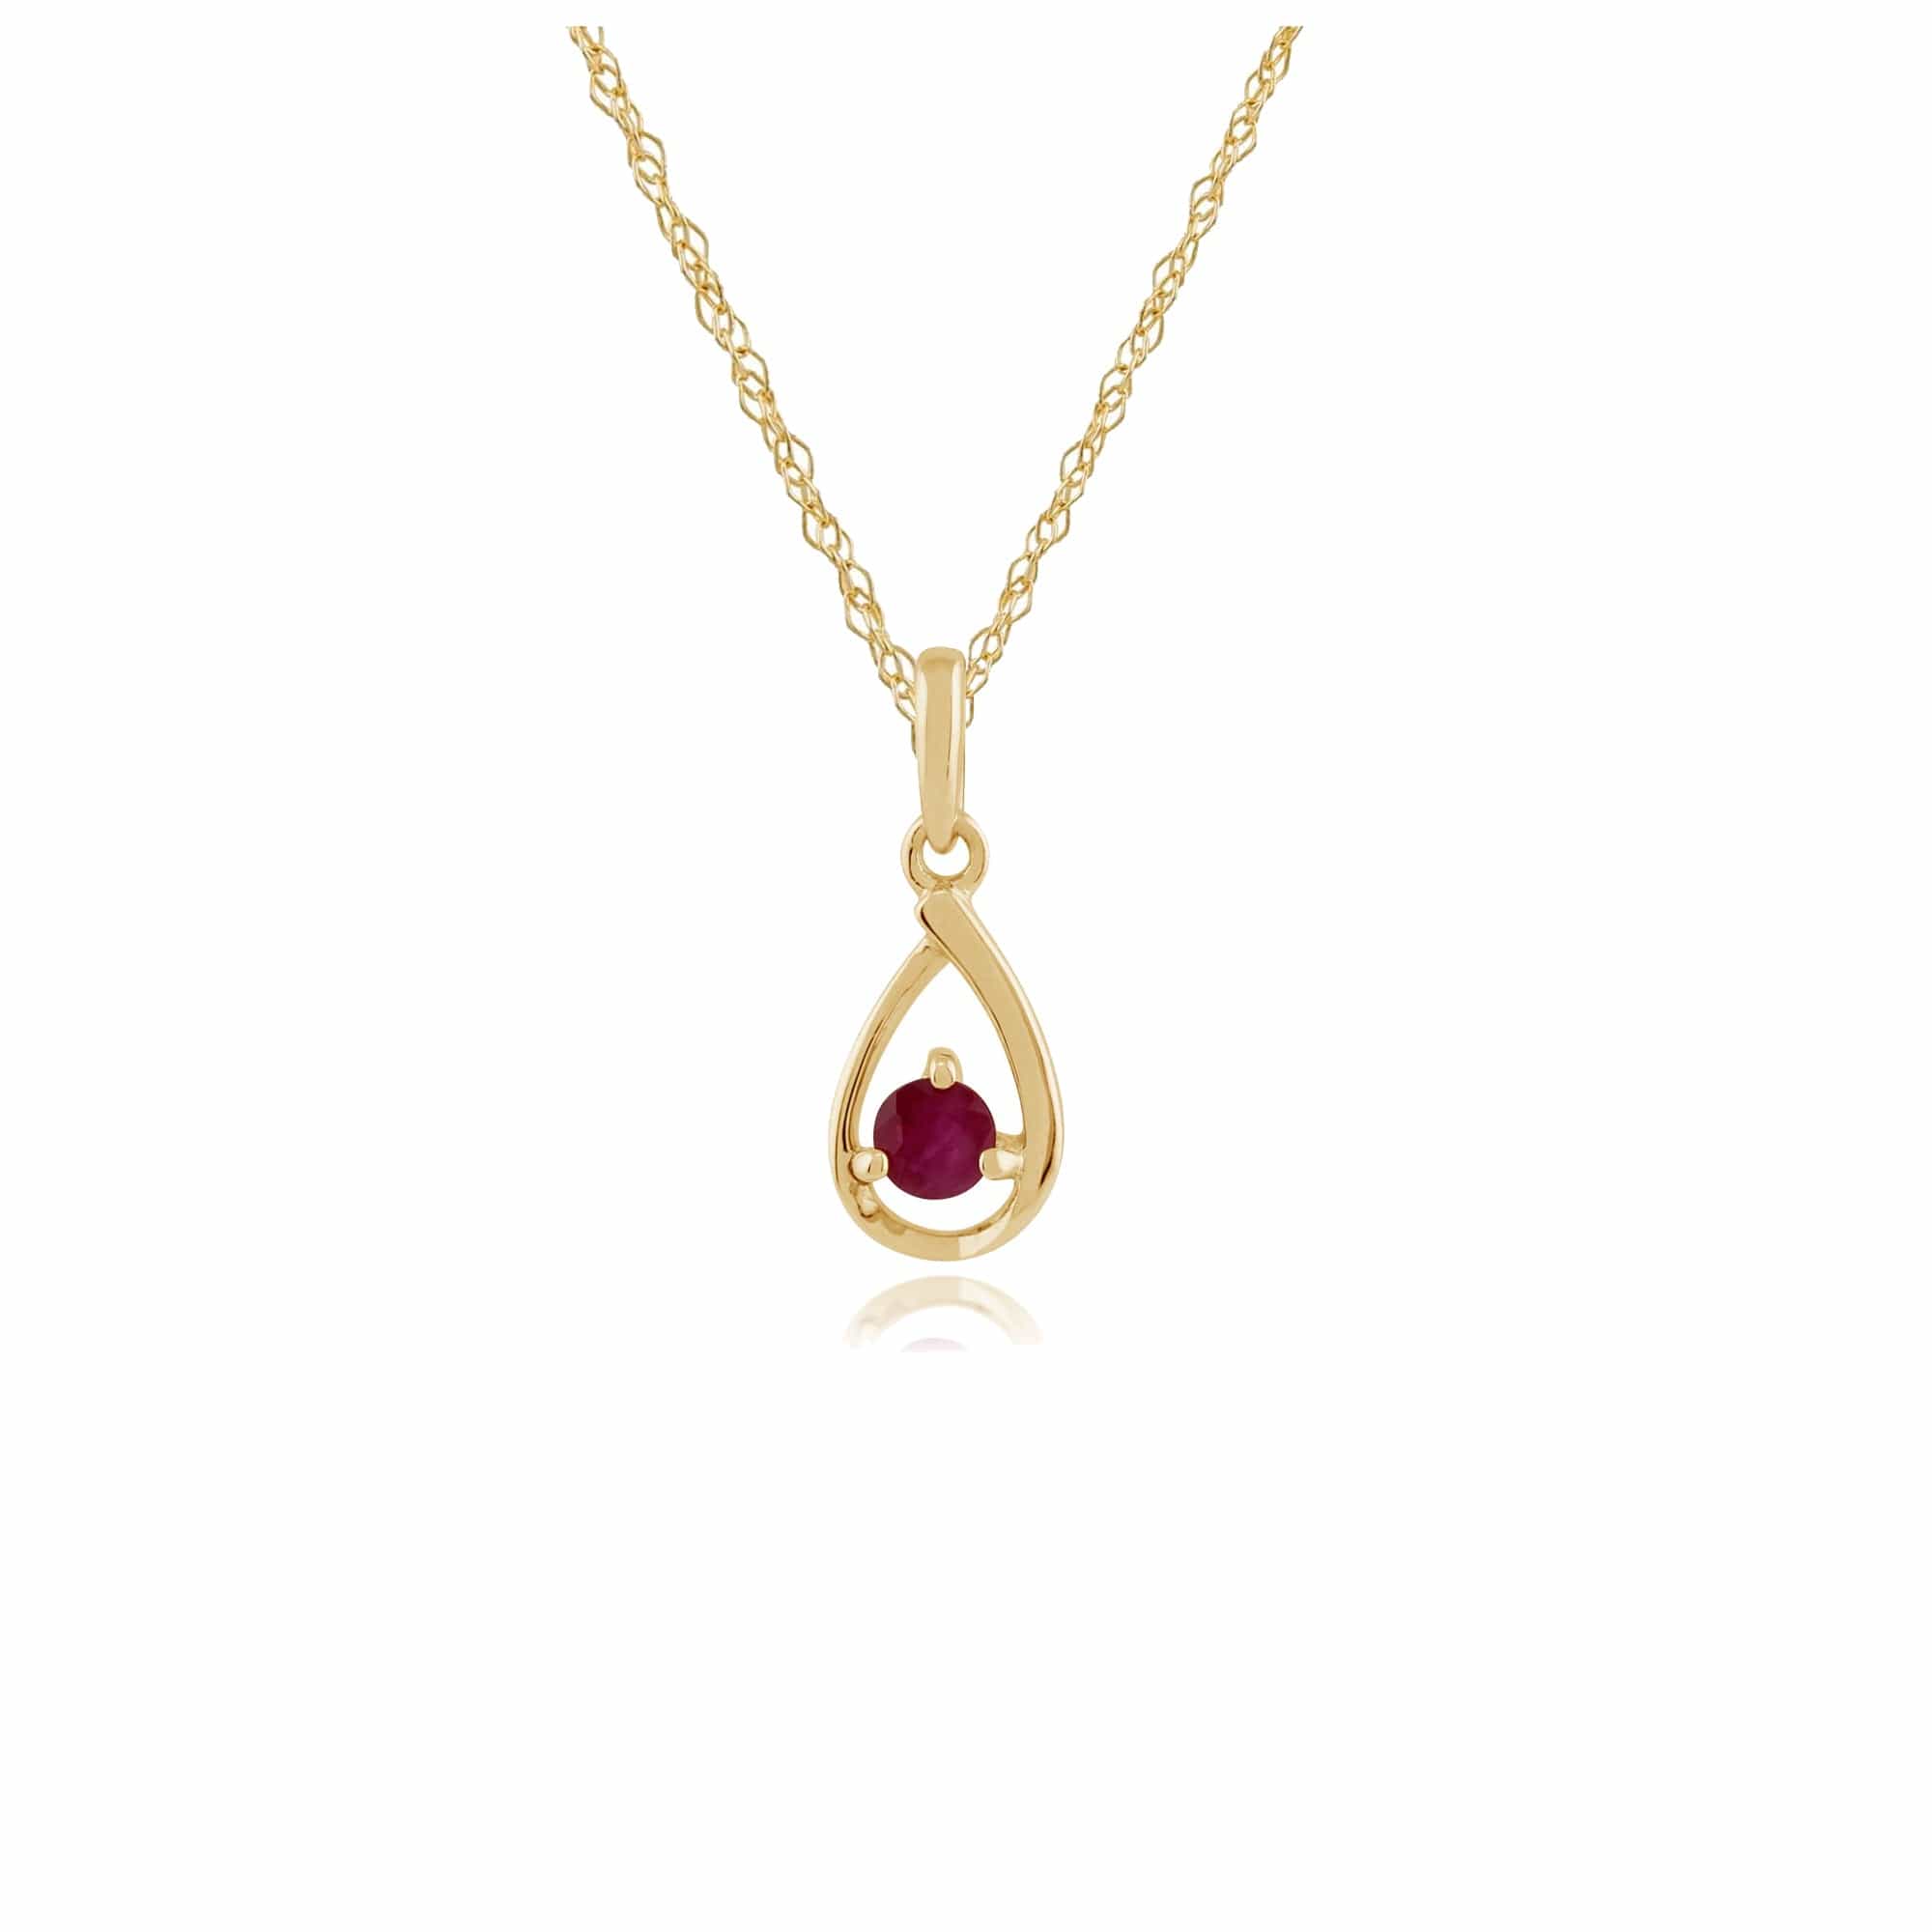 Photos - Pendant / Choker Necklace Classic Round Ruby Halo Pendant in 9ct Yellow Gold